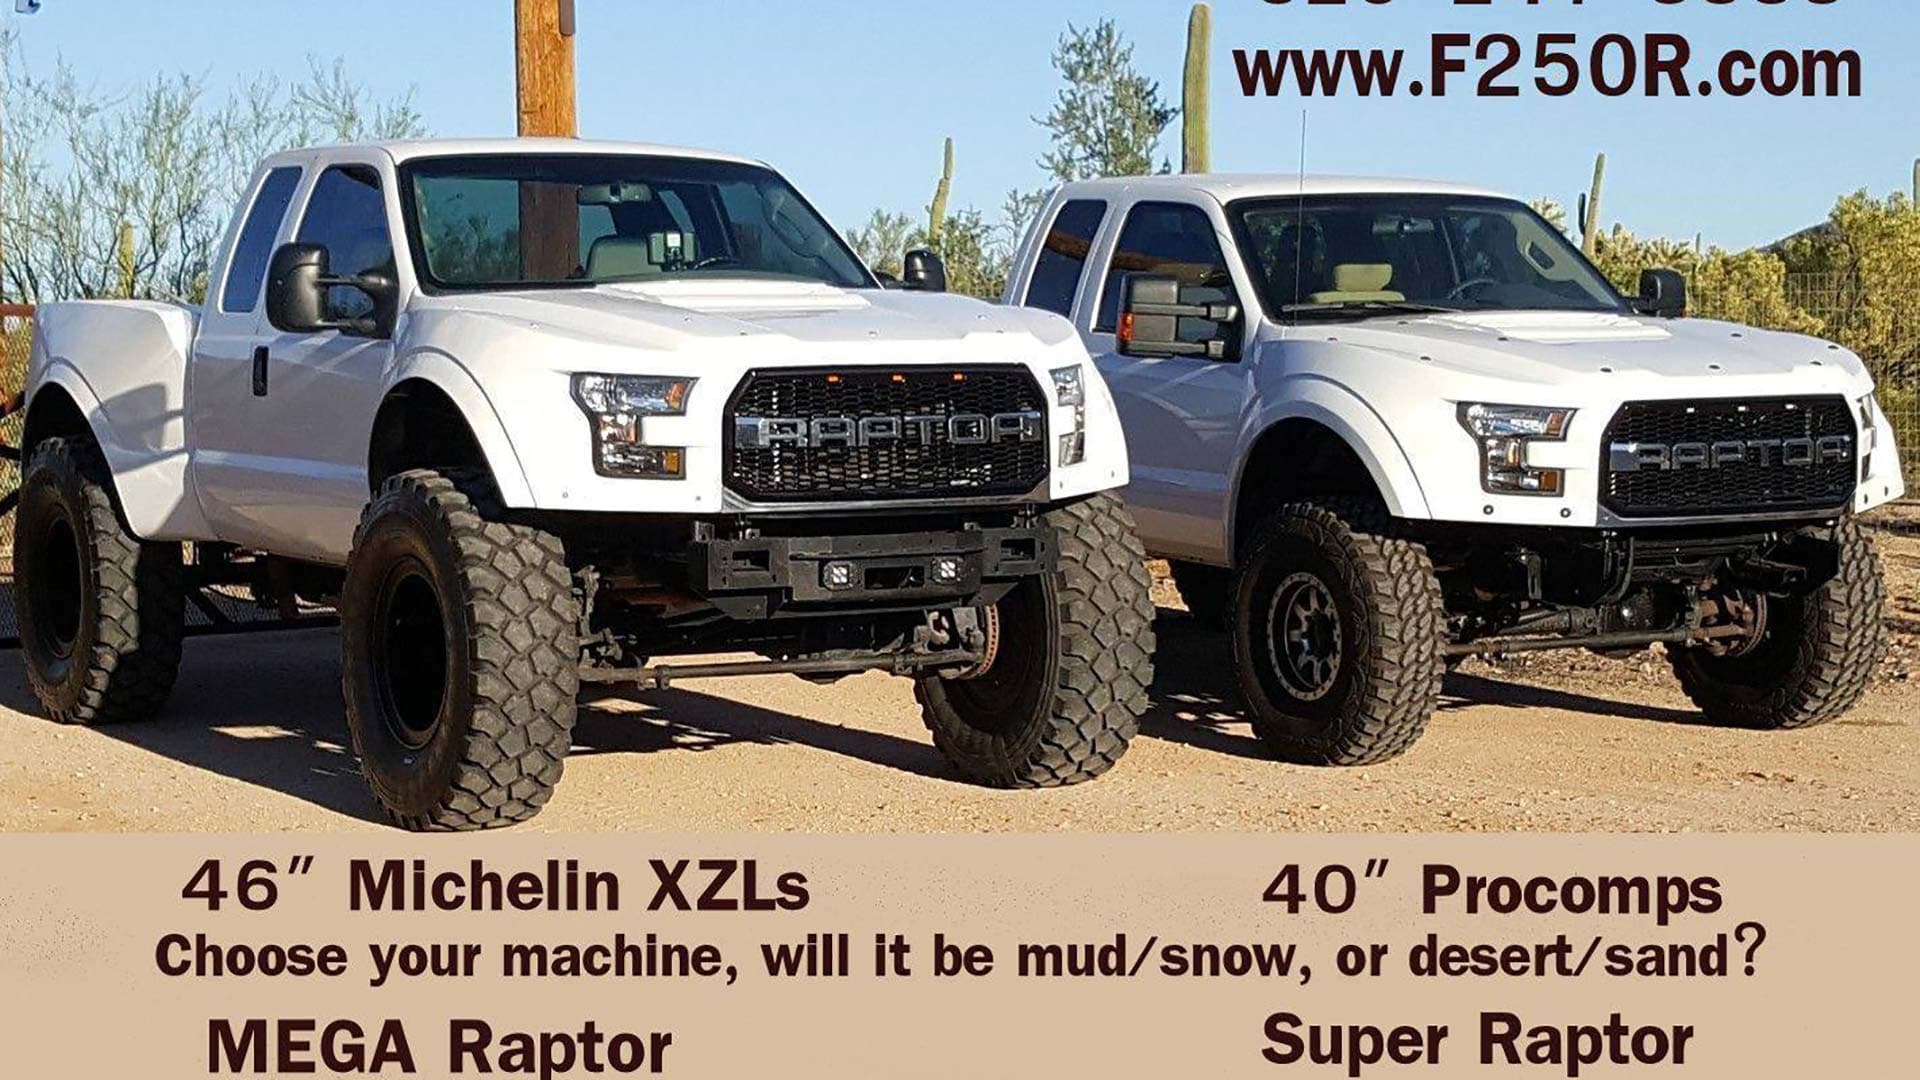 F250R’s Ford F-250 MegaRaptor Is Nothing Short of Insane